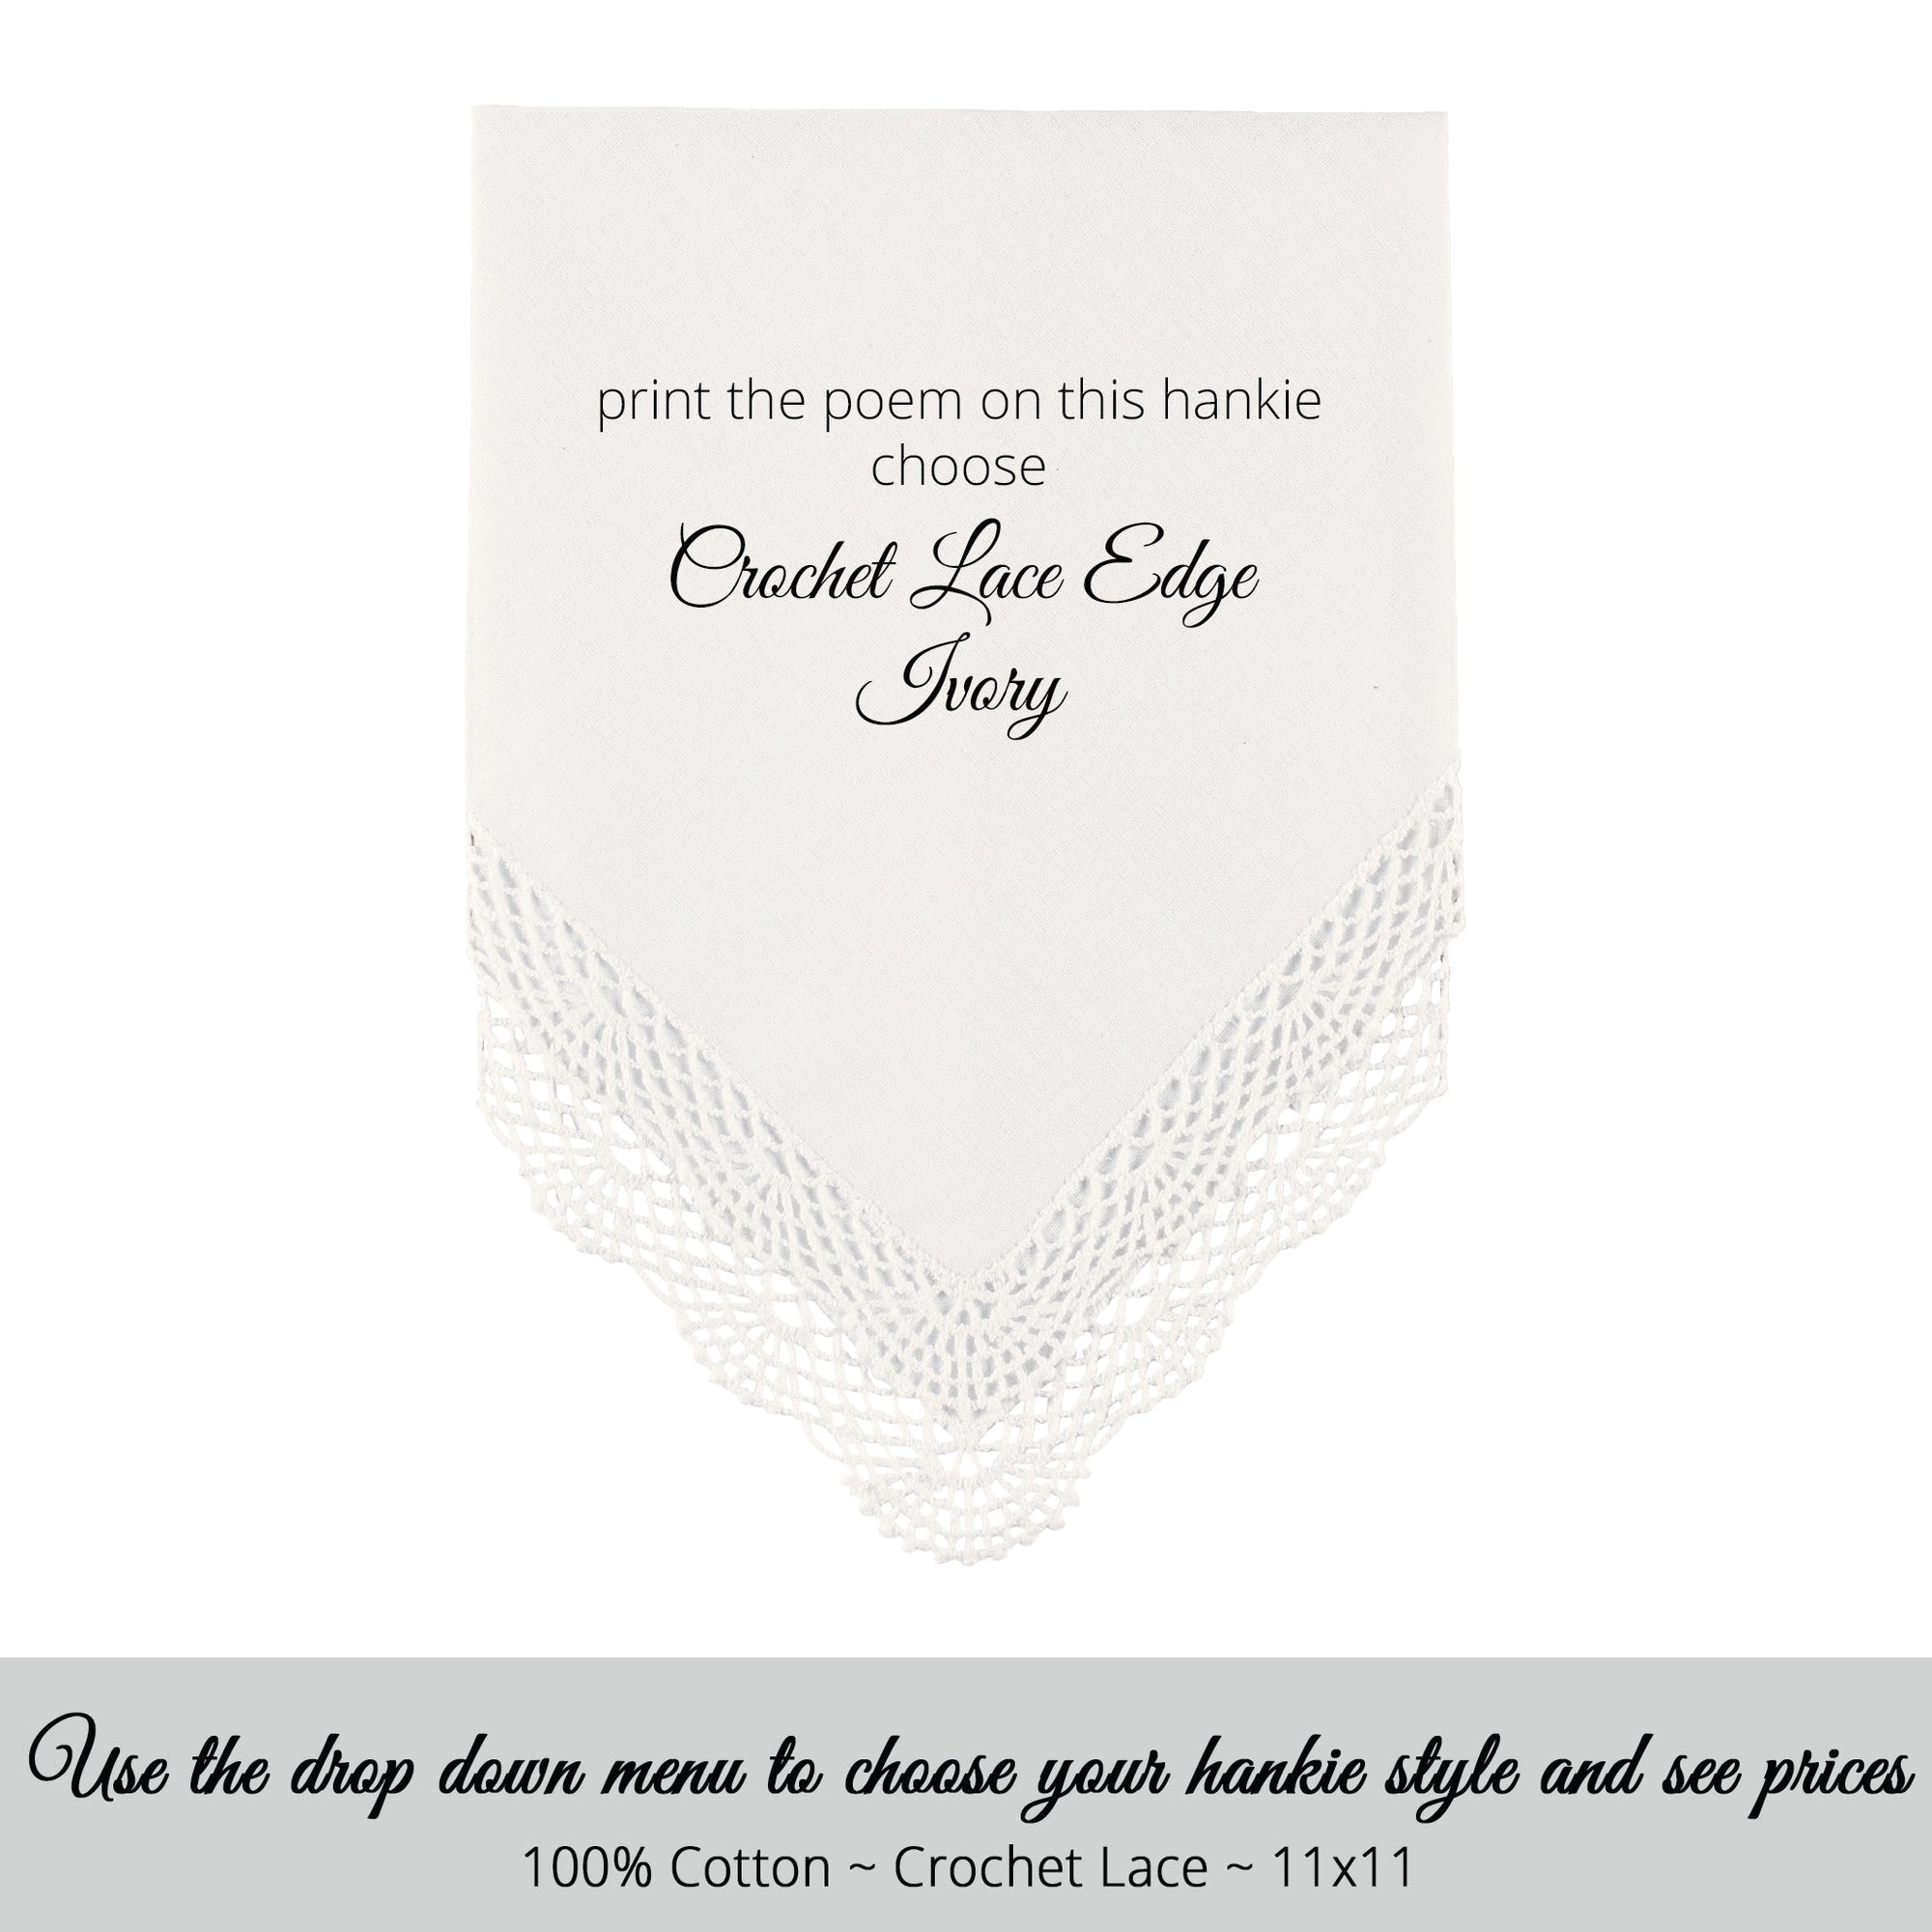 Wedding handkerchief ivory with crochet lace edge for the sister in law bridesmaid poem printed hankie